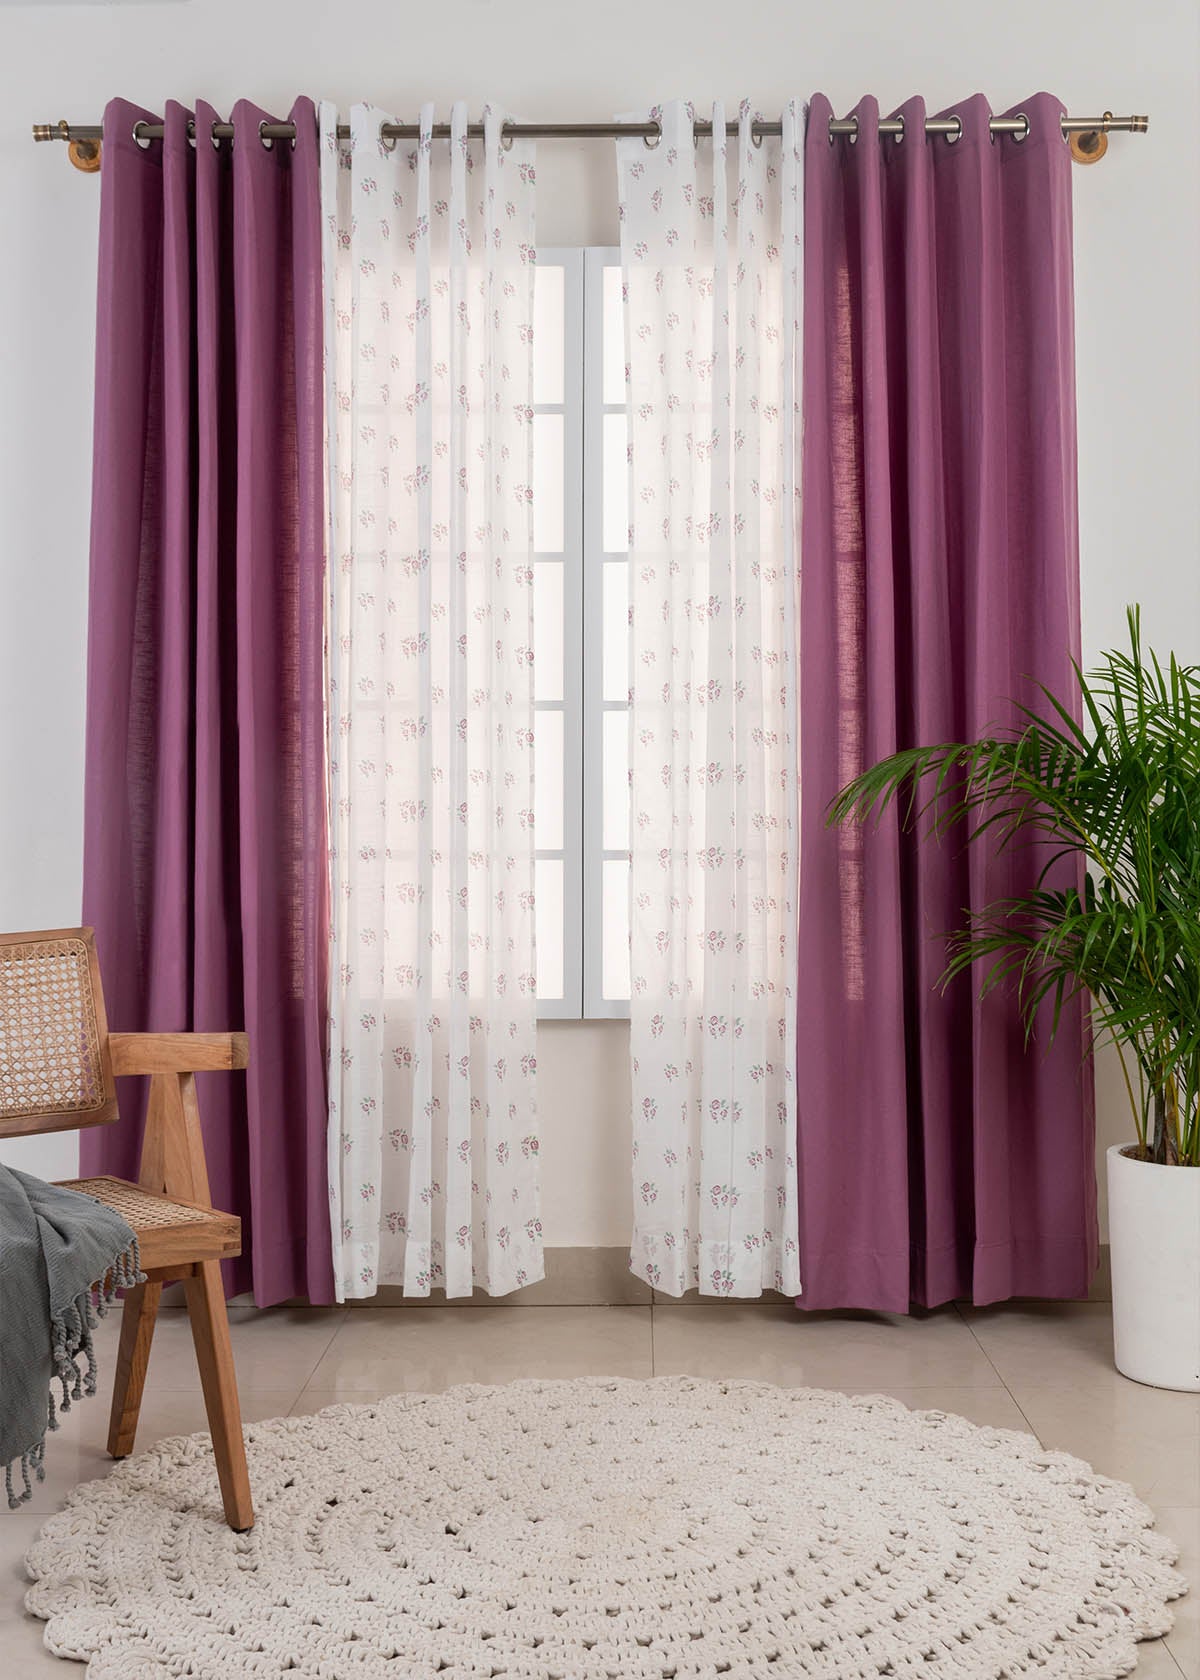 Grape Solid, Rose Garden Sheer Set Of 2 Combo Cotton Curtain - Lavender